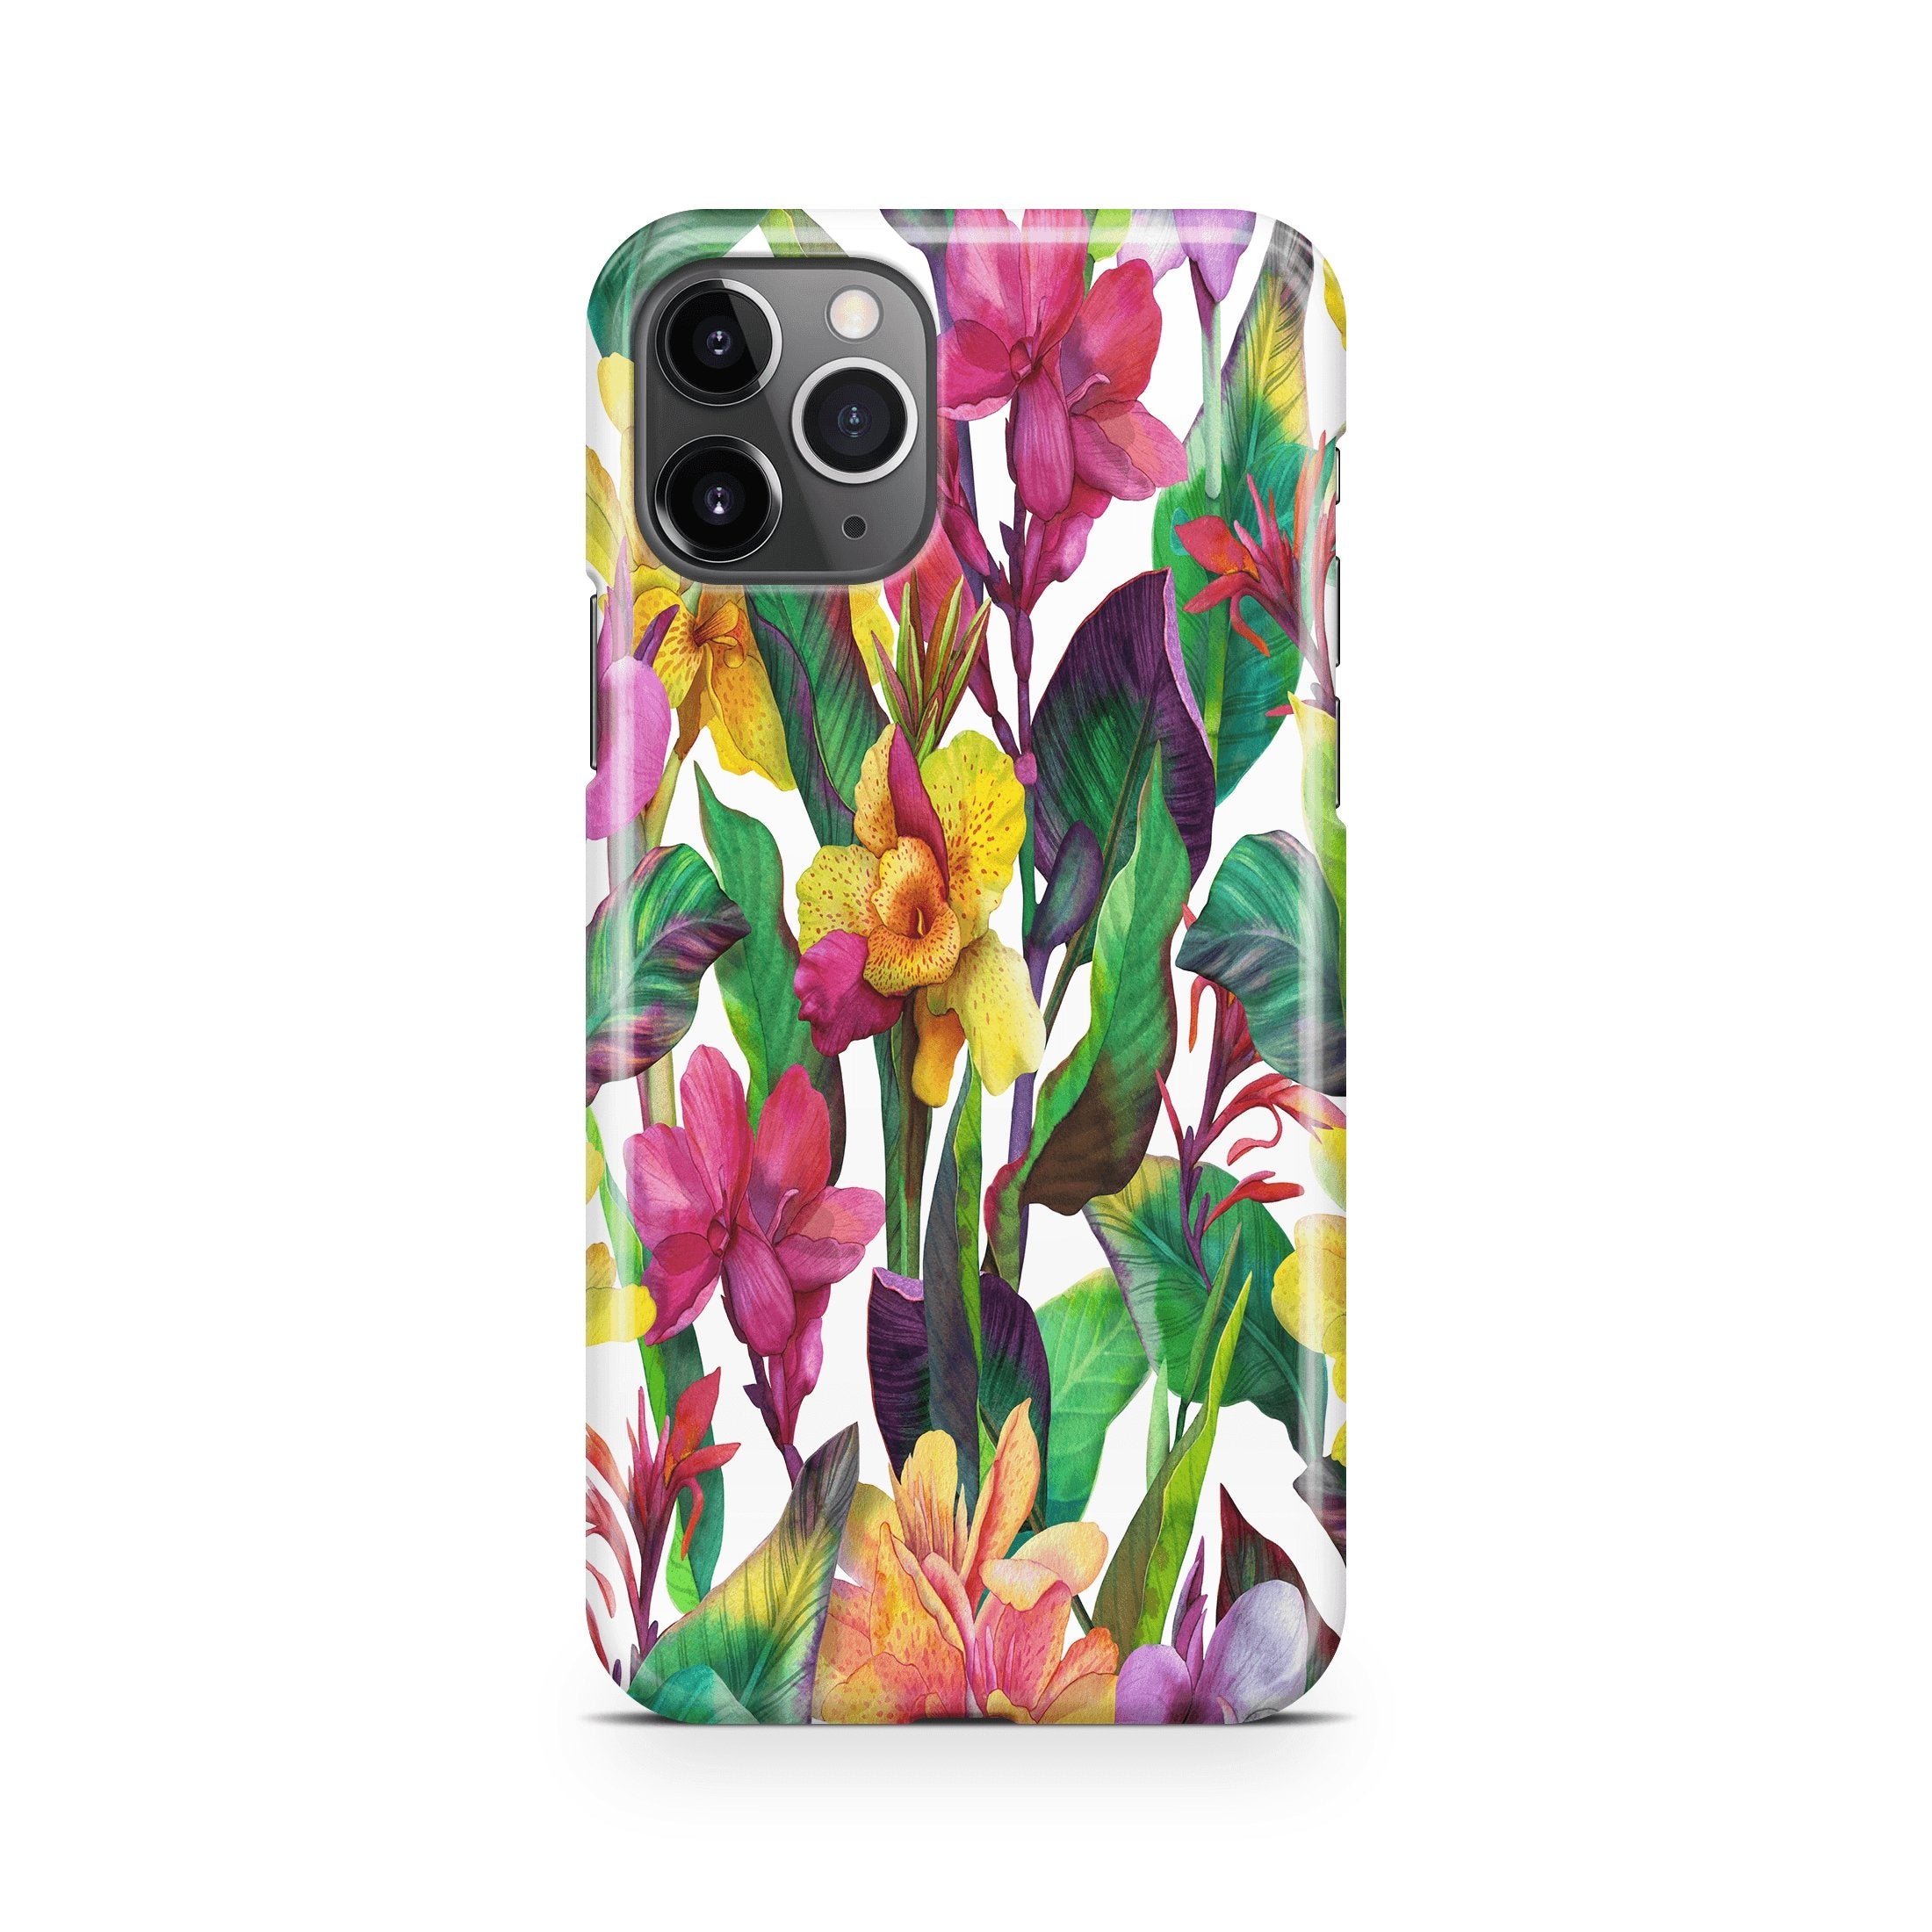 Canna Lily - iPhone phone case designs by CaseSwagger